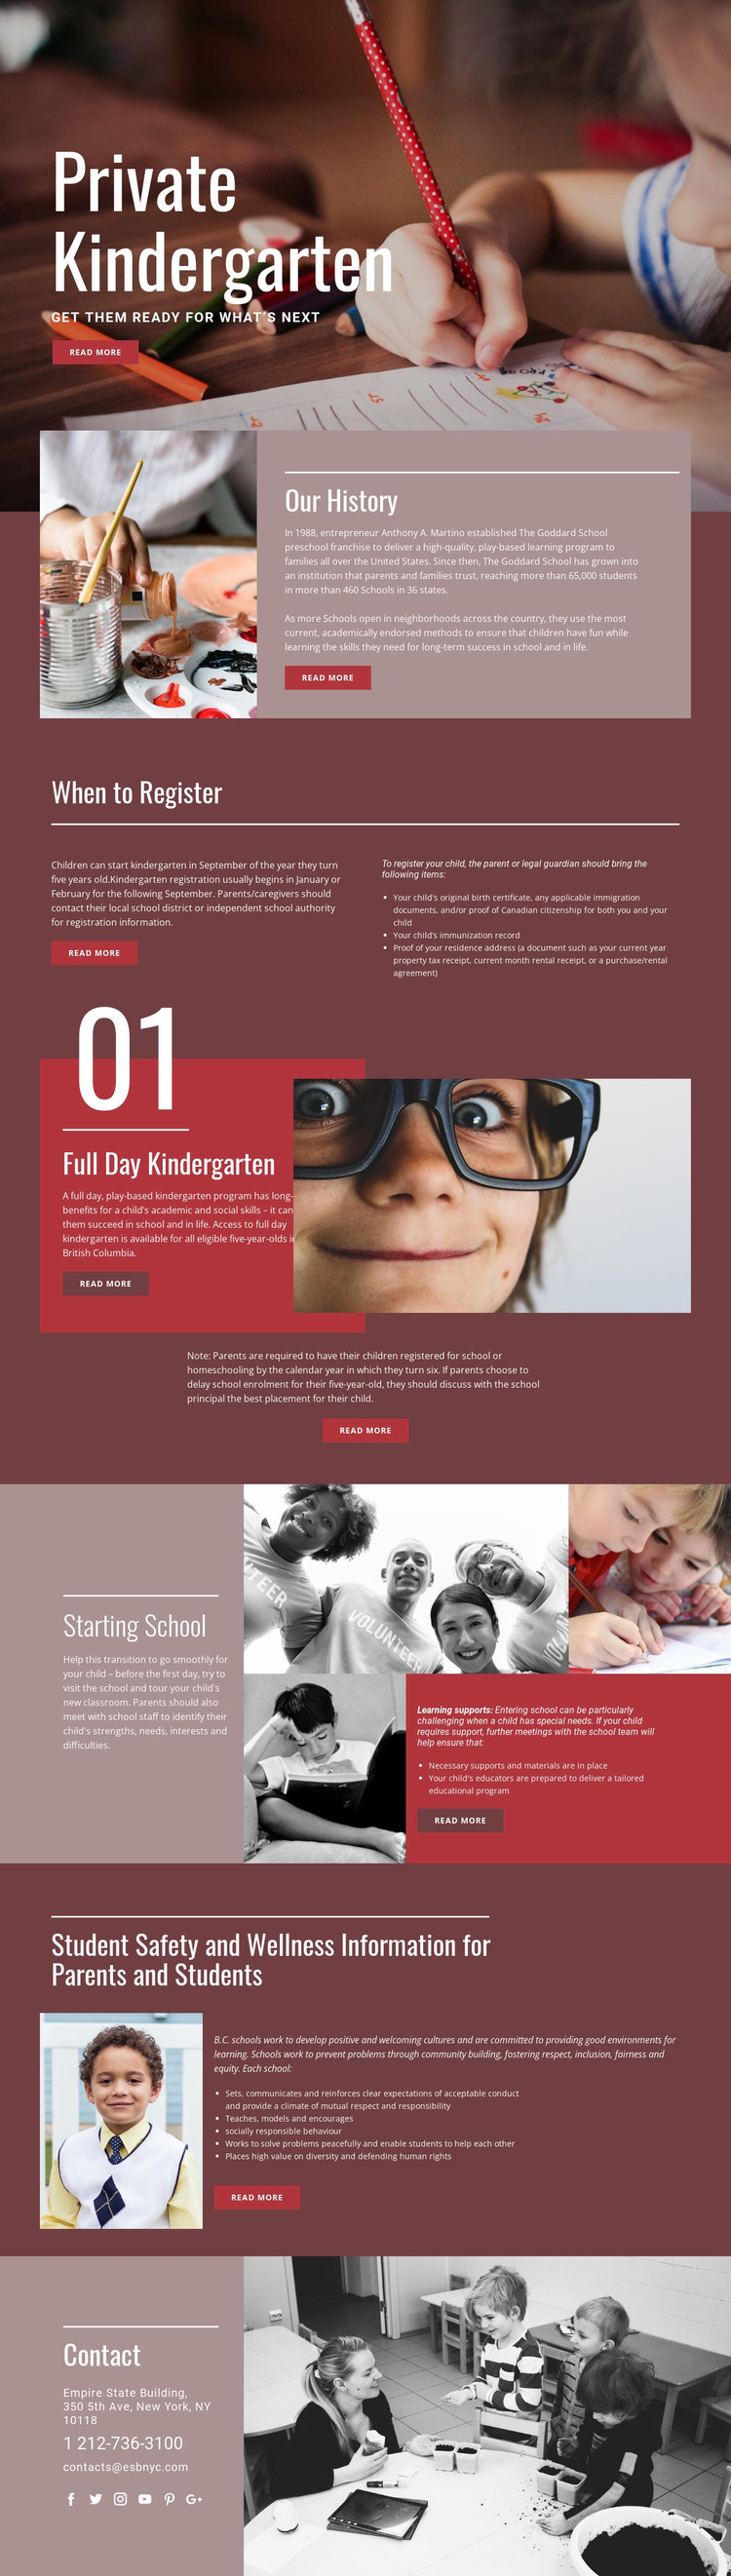 Private elementary education Website Mockup